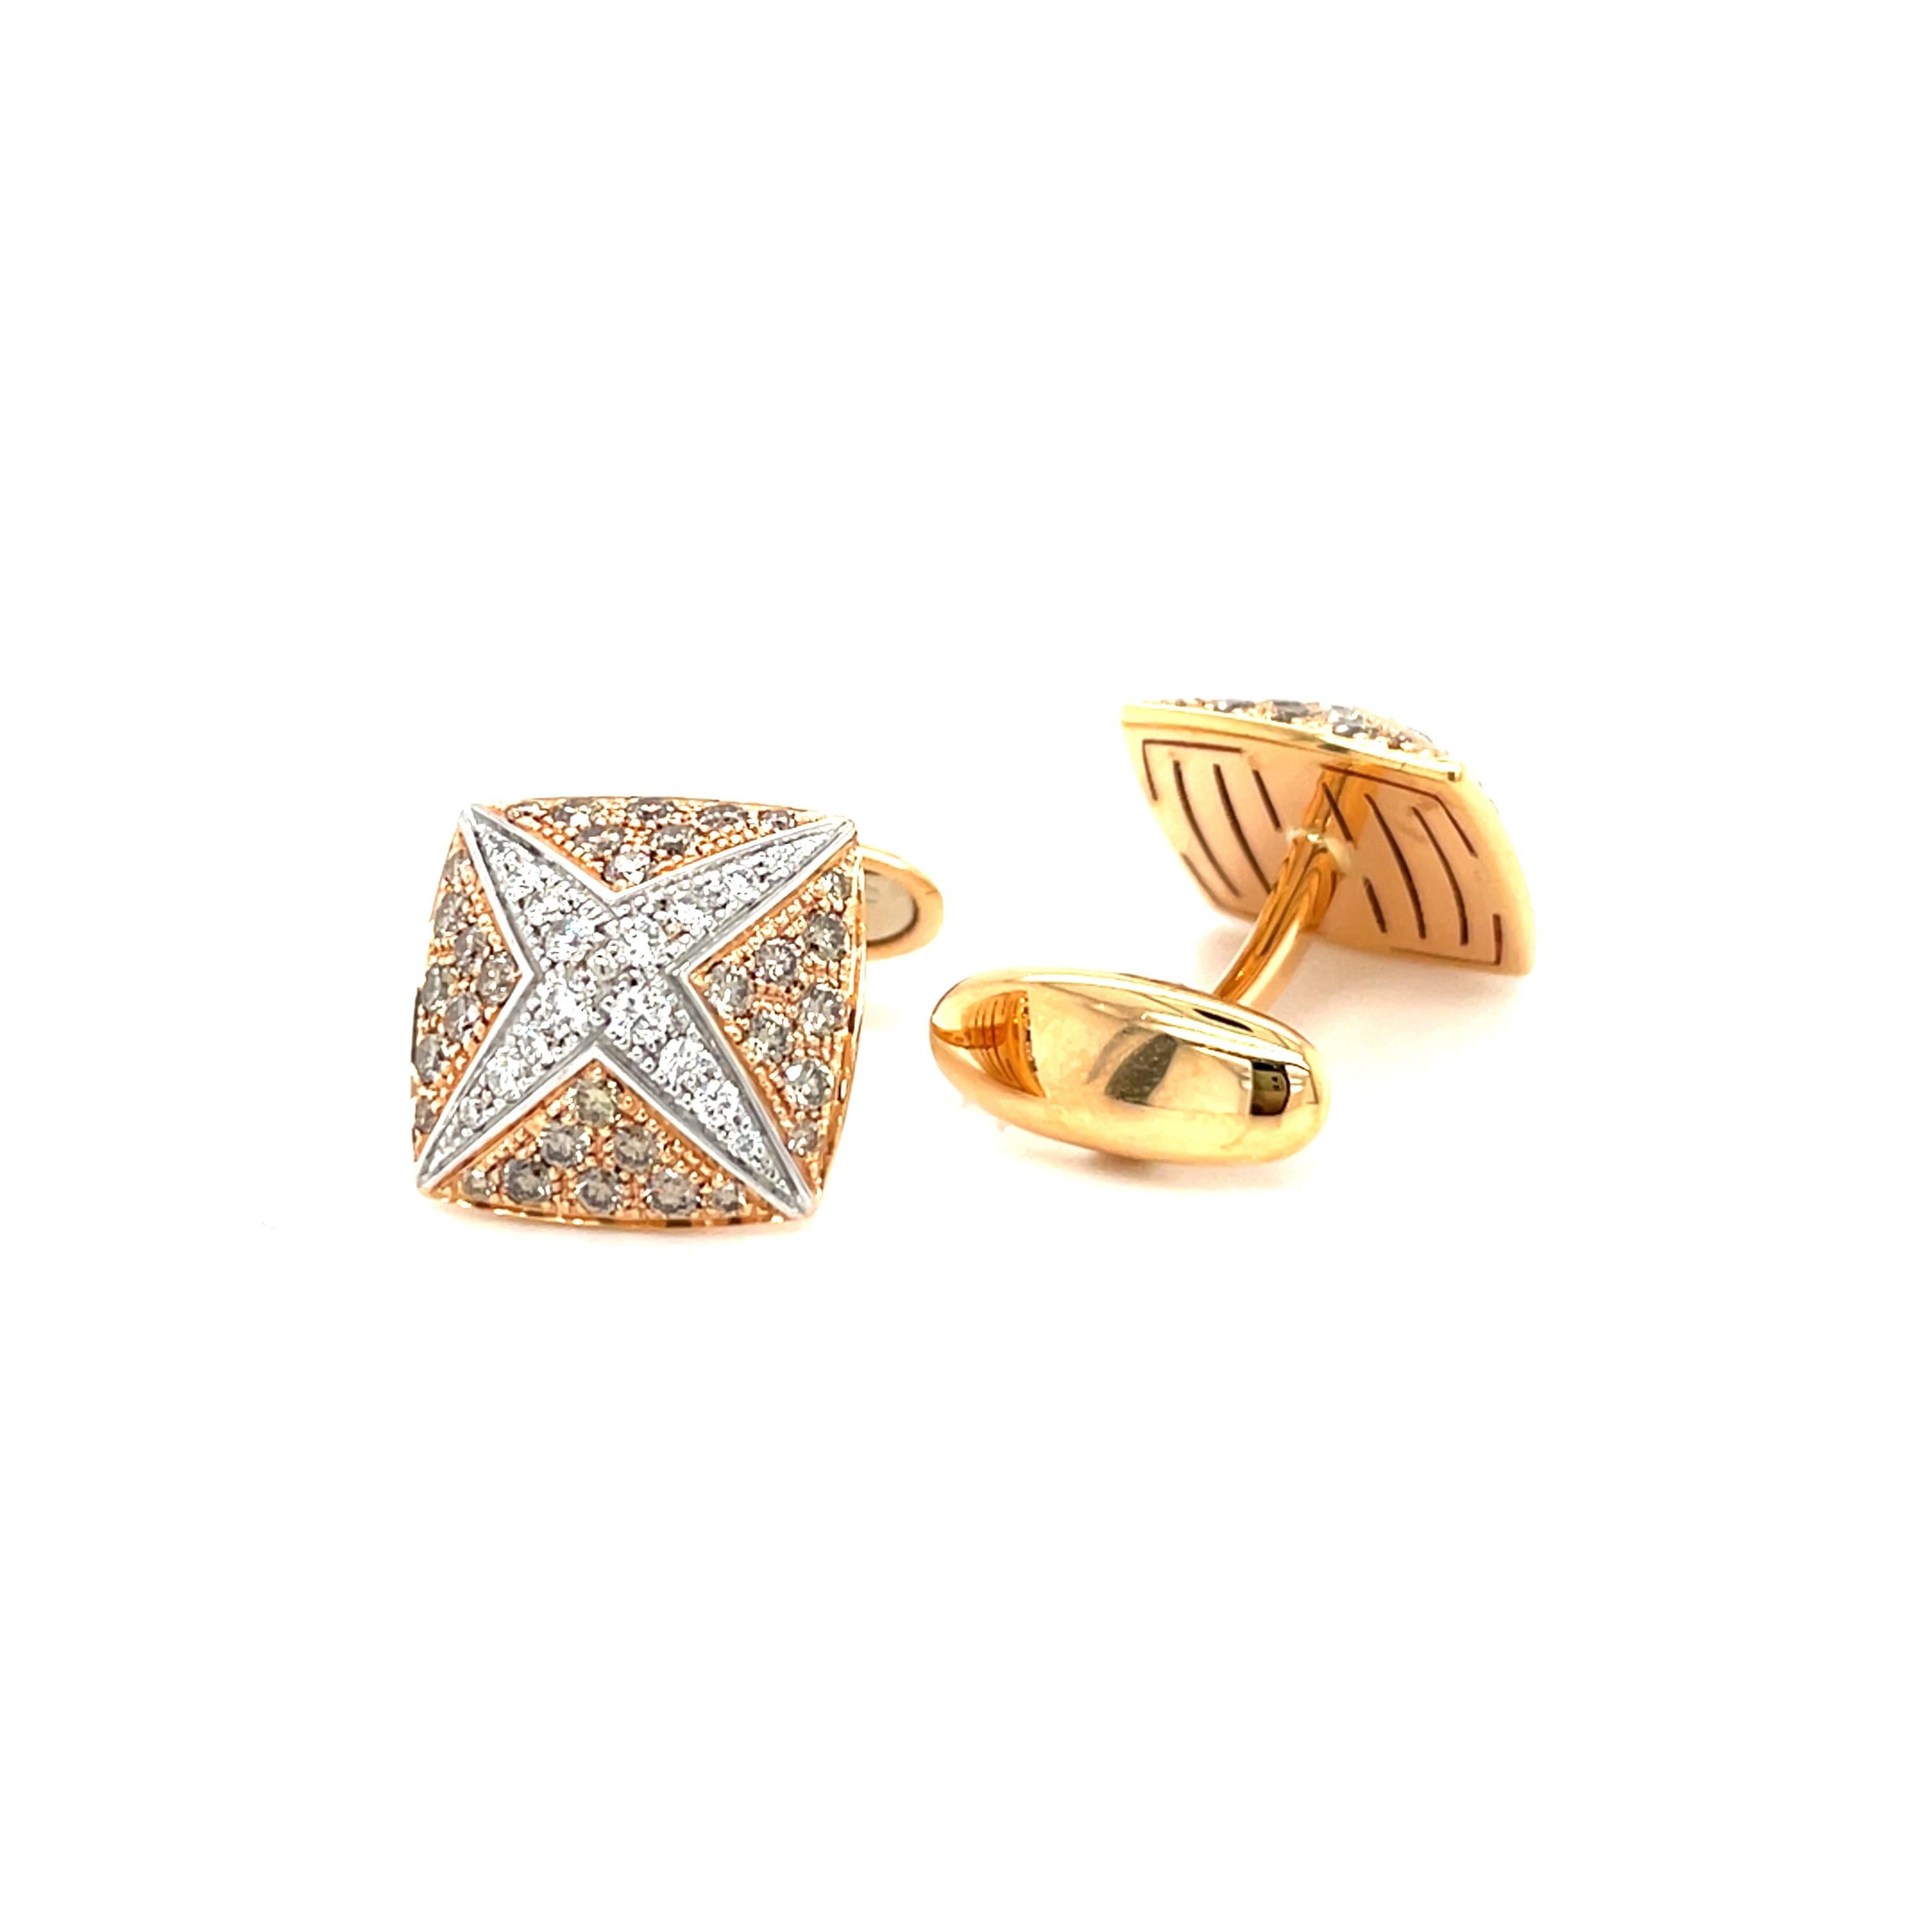 These  yelllow gold cufflinks are from Men's Collection. These cufflinks are decorated with diamonds G color VS2 clarity. The total amount of diamonds is 0.54 Carat and brown diamonds 1.42. The dimensions of the cufflinks are 1.5cm x 1.5cm. These